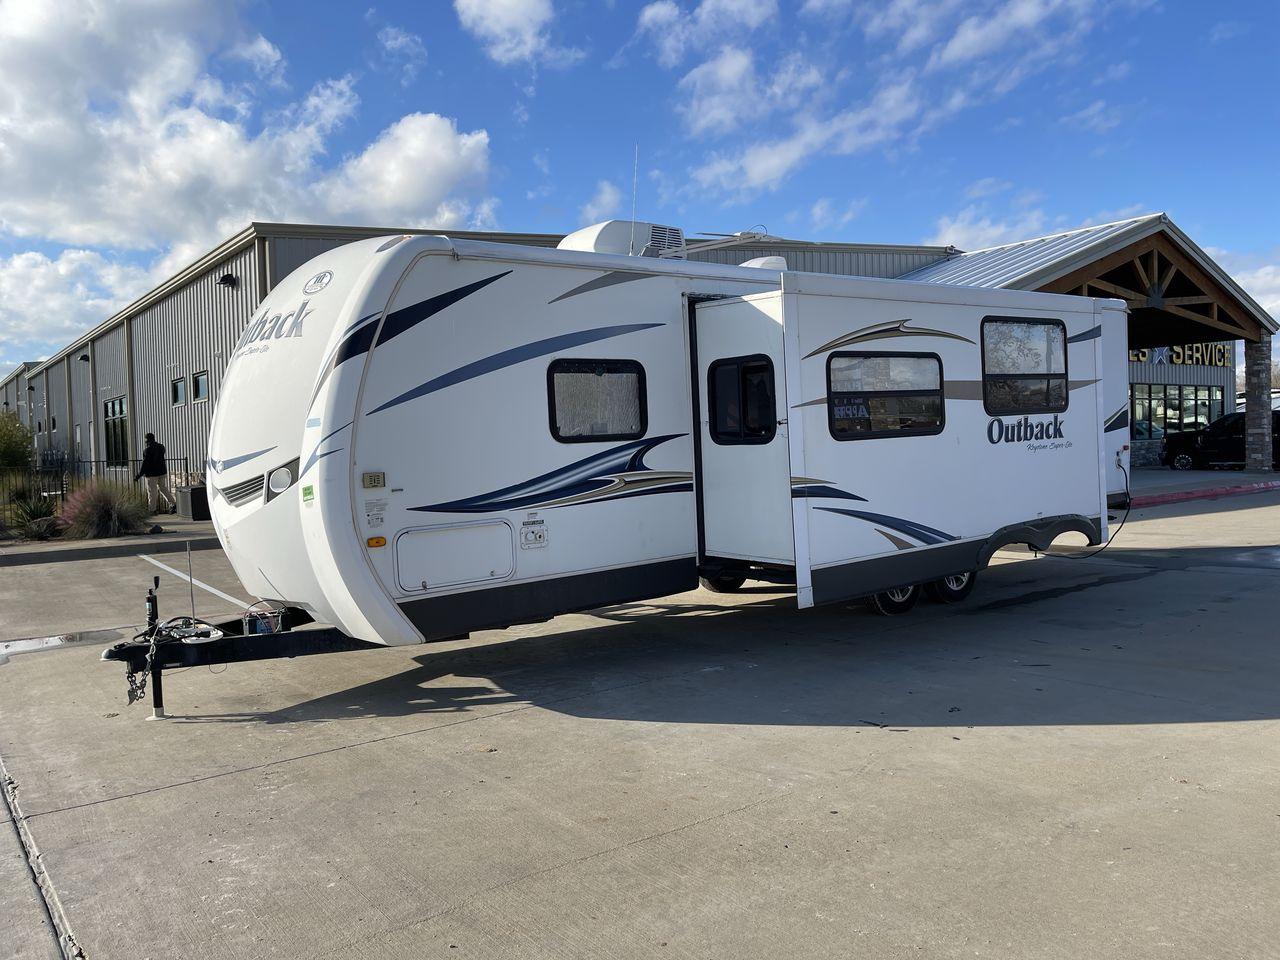 2012 WHITE KEYSTONE OUTBACK 292BH (4YDT29225CB) , Length: 32.75 | Dry Weight: 6,559 lbs. | Gross Weight: 8,200 lbs. | Slides: 1 transmission, located at 4319 N Main Street, Cleburne, TX, 76033, (817) 221-0660, 32.435829, -97.384178 - The 2012 Keystone Outback 292BH is a versatile and well-equipped travel trailer perfect for enjoyable family adventures. This model offers a great balance between spaciousness and towability, with a length of 32.75 feet and a dry weight of 6,559 pounds. With a single slide, the Outback 292BH provide - Photo #23